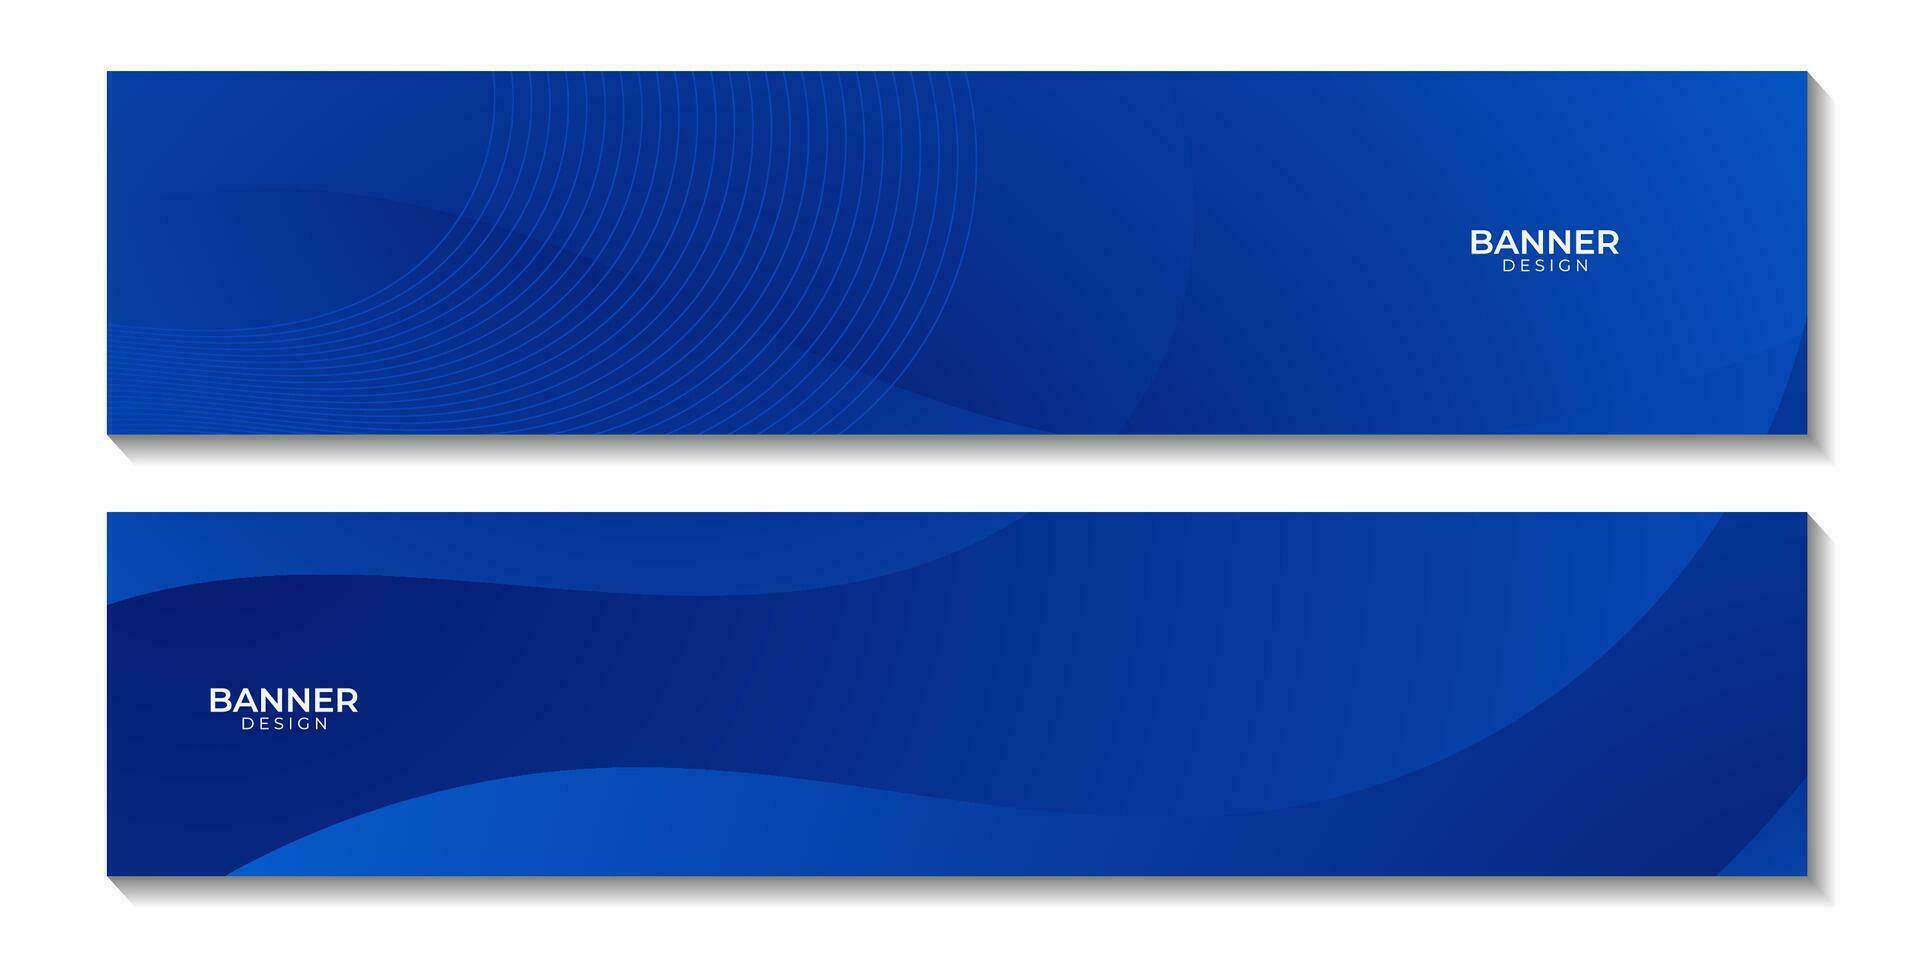 abstract dark blue wave banners background vector